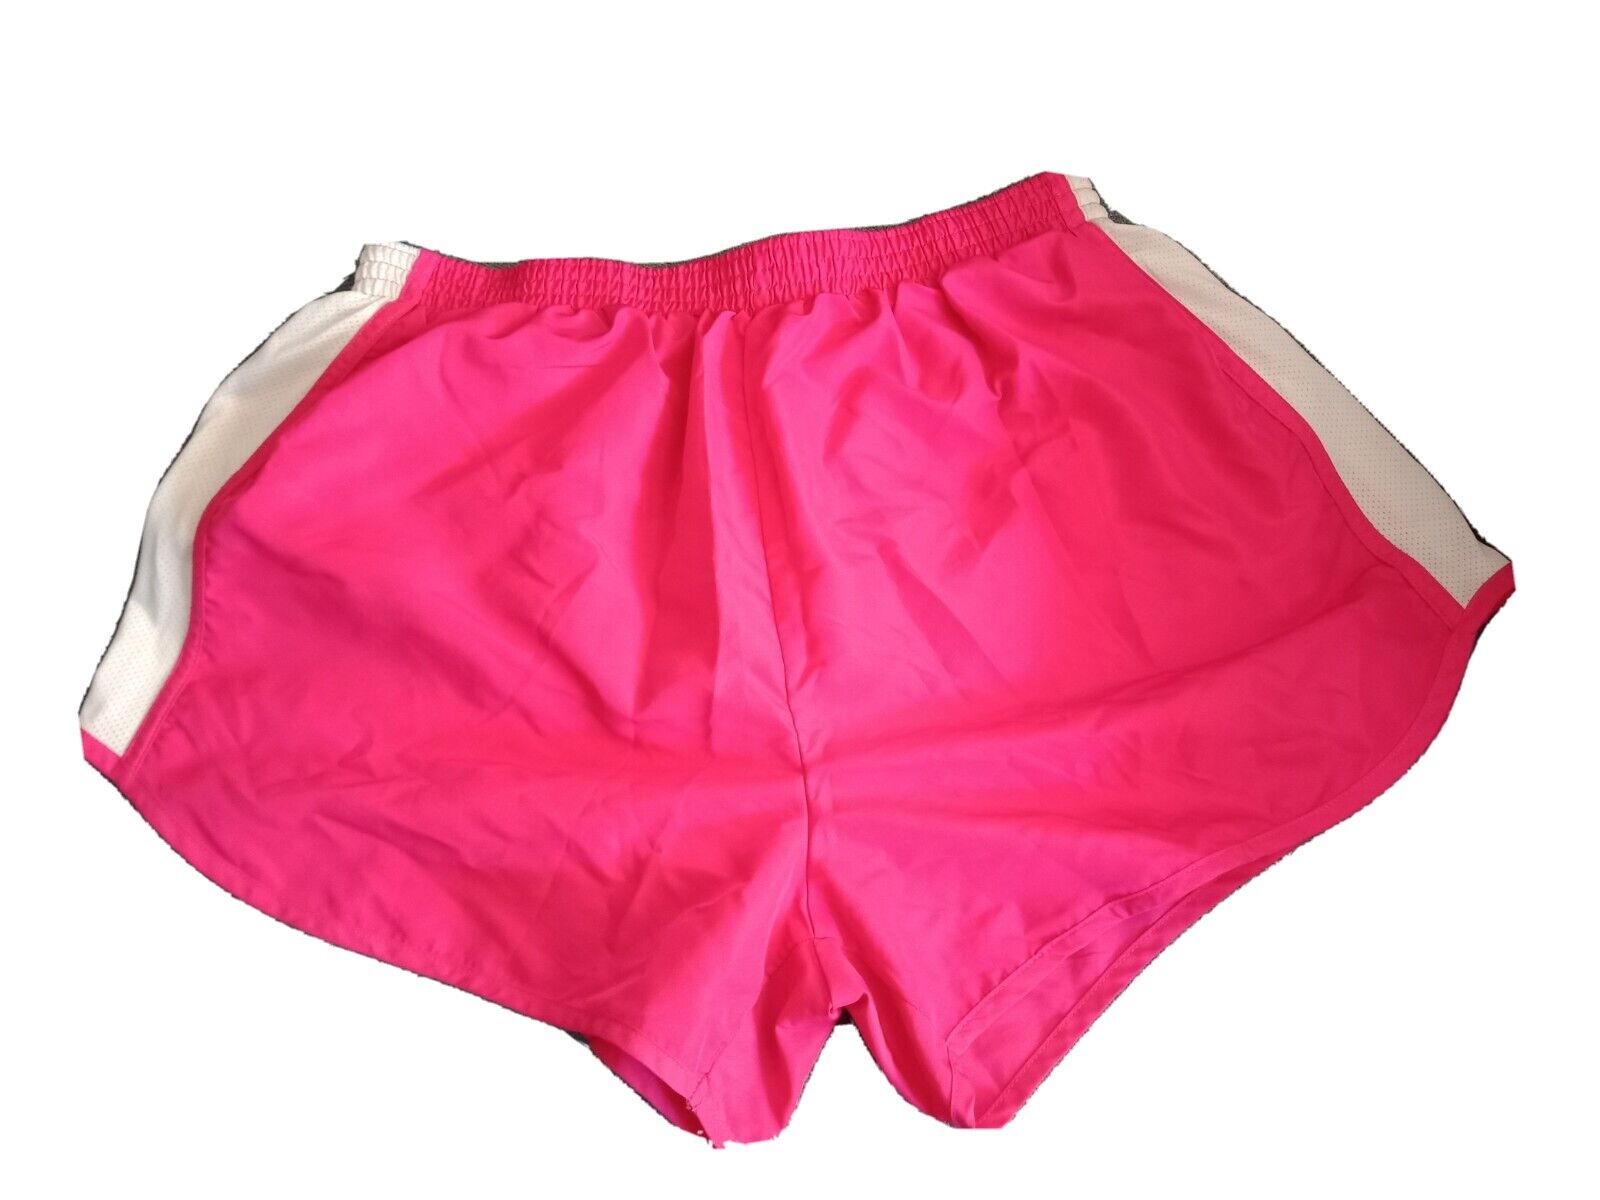 Imagin8 Women's Sport Shorts Size  Large Pink with white Mesh on sides